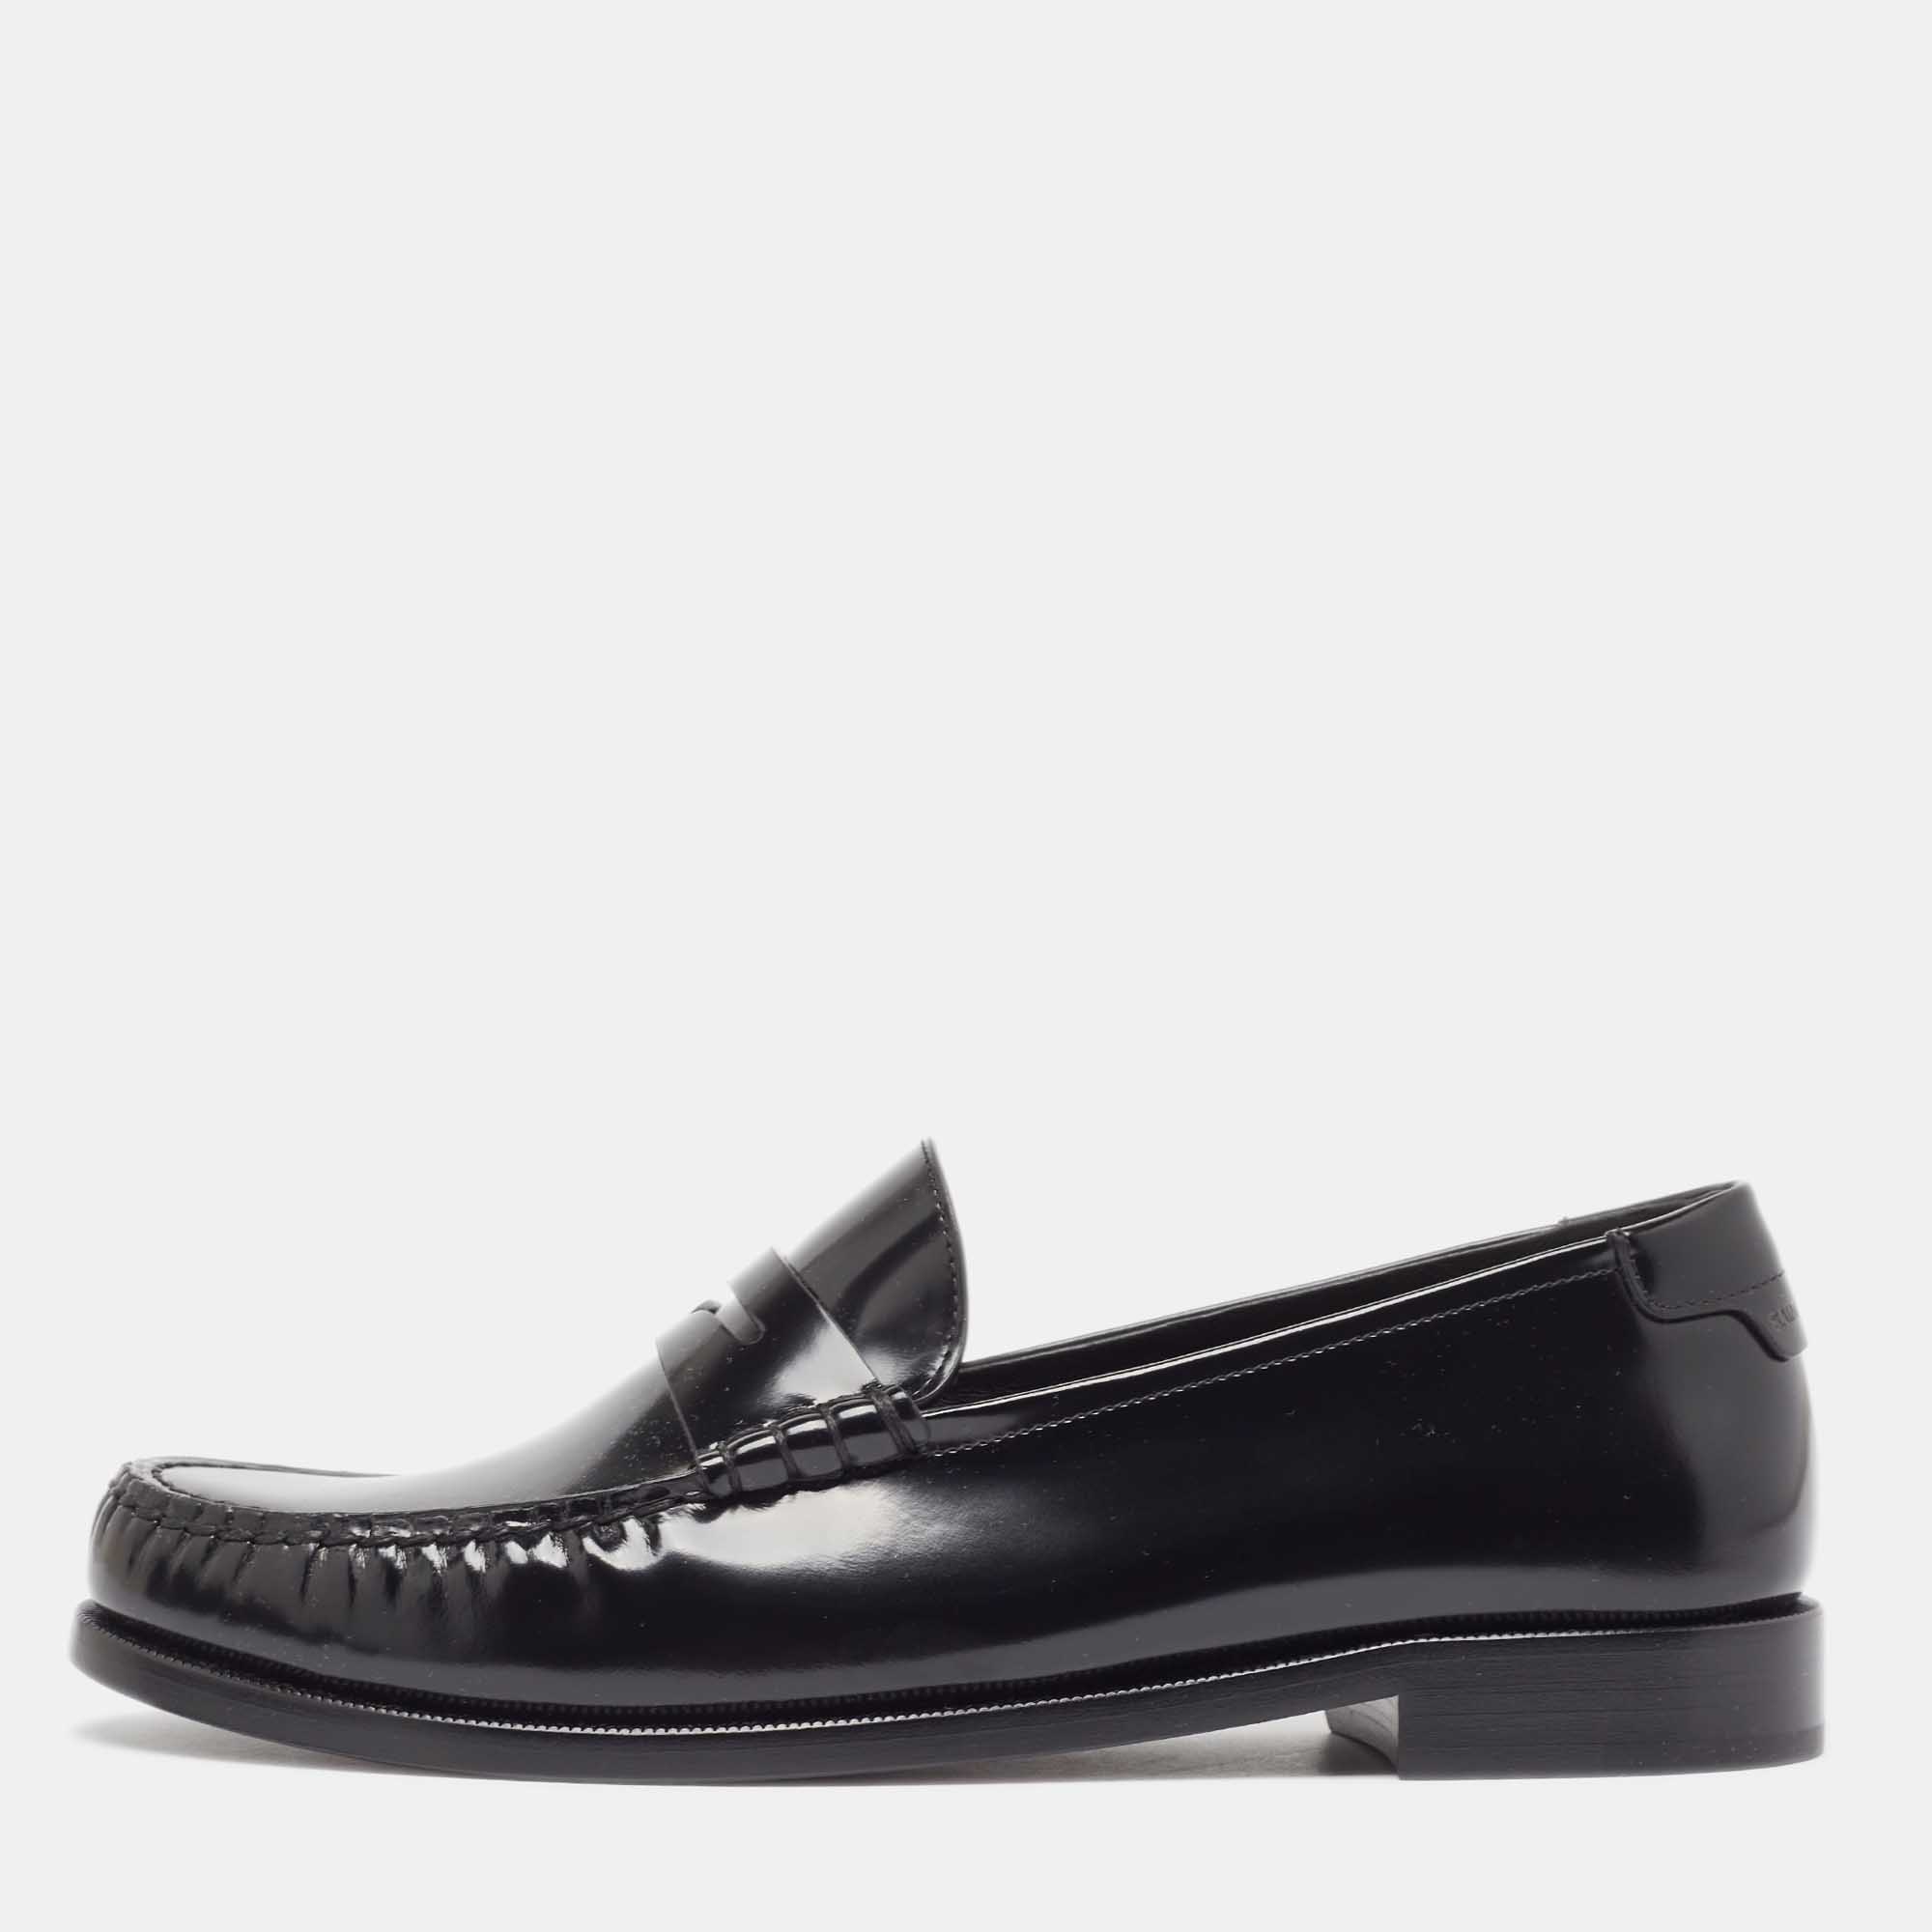 

Saint Laurent Black Glossy Leather Penny Loafers Size